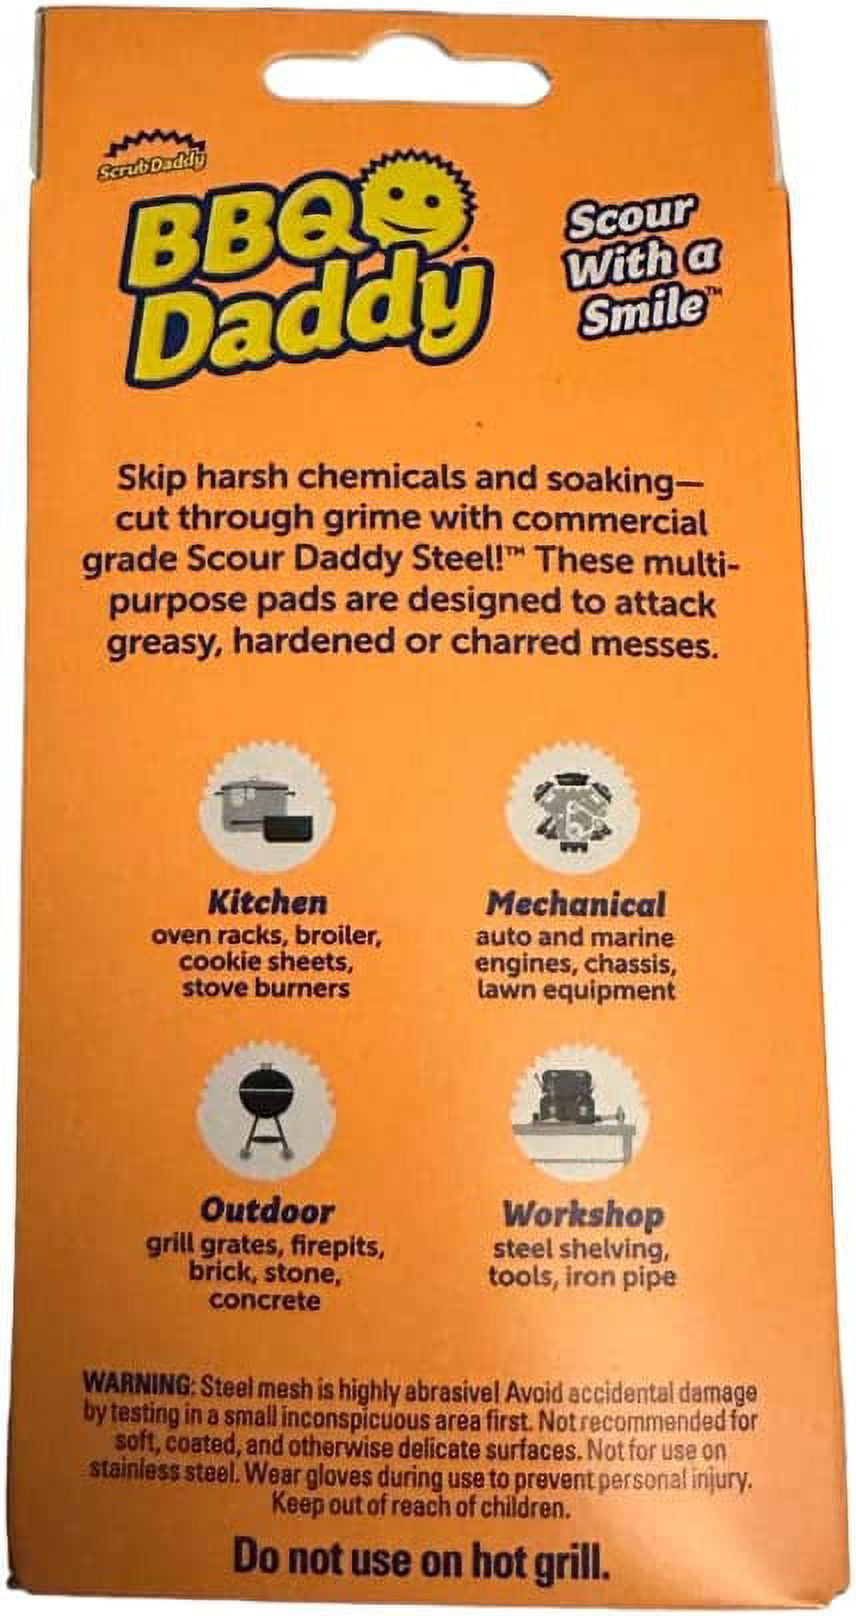 make it hard stainless steel scrubber not scrub Daddy erase the